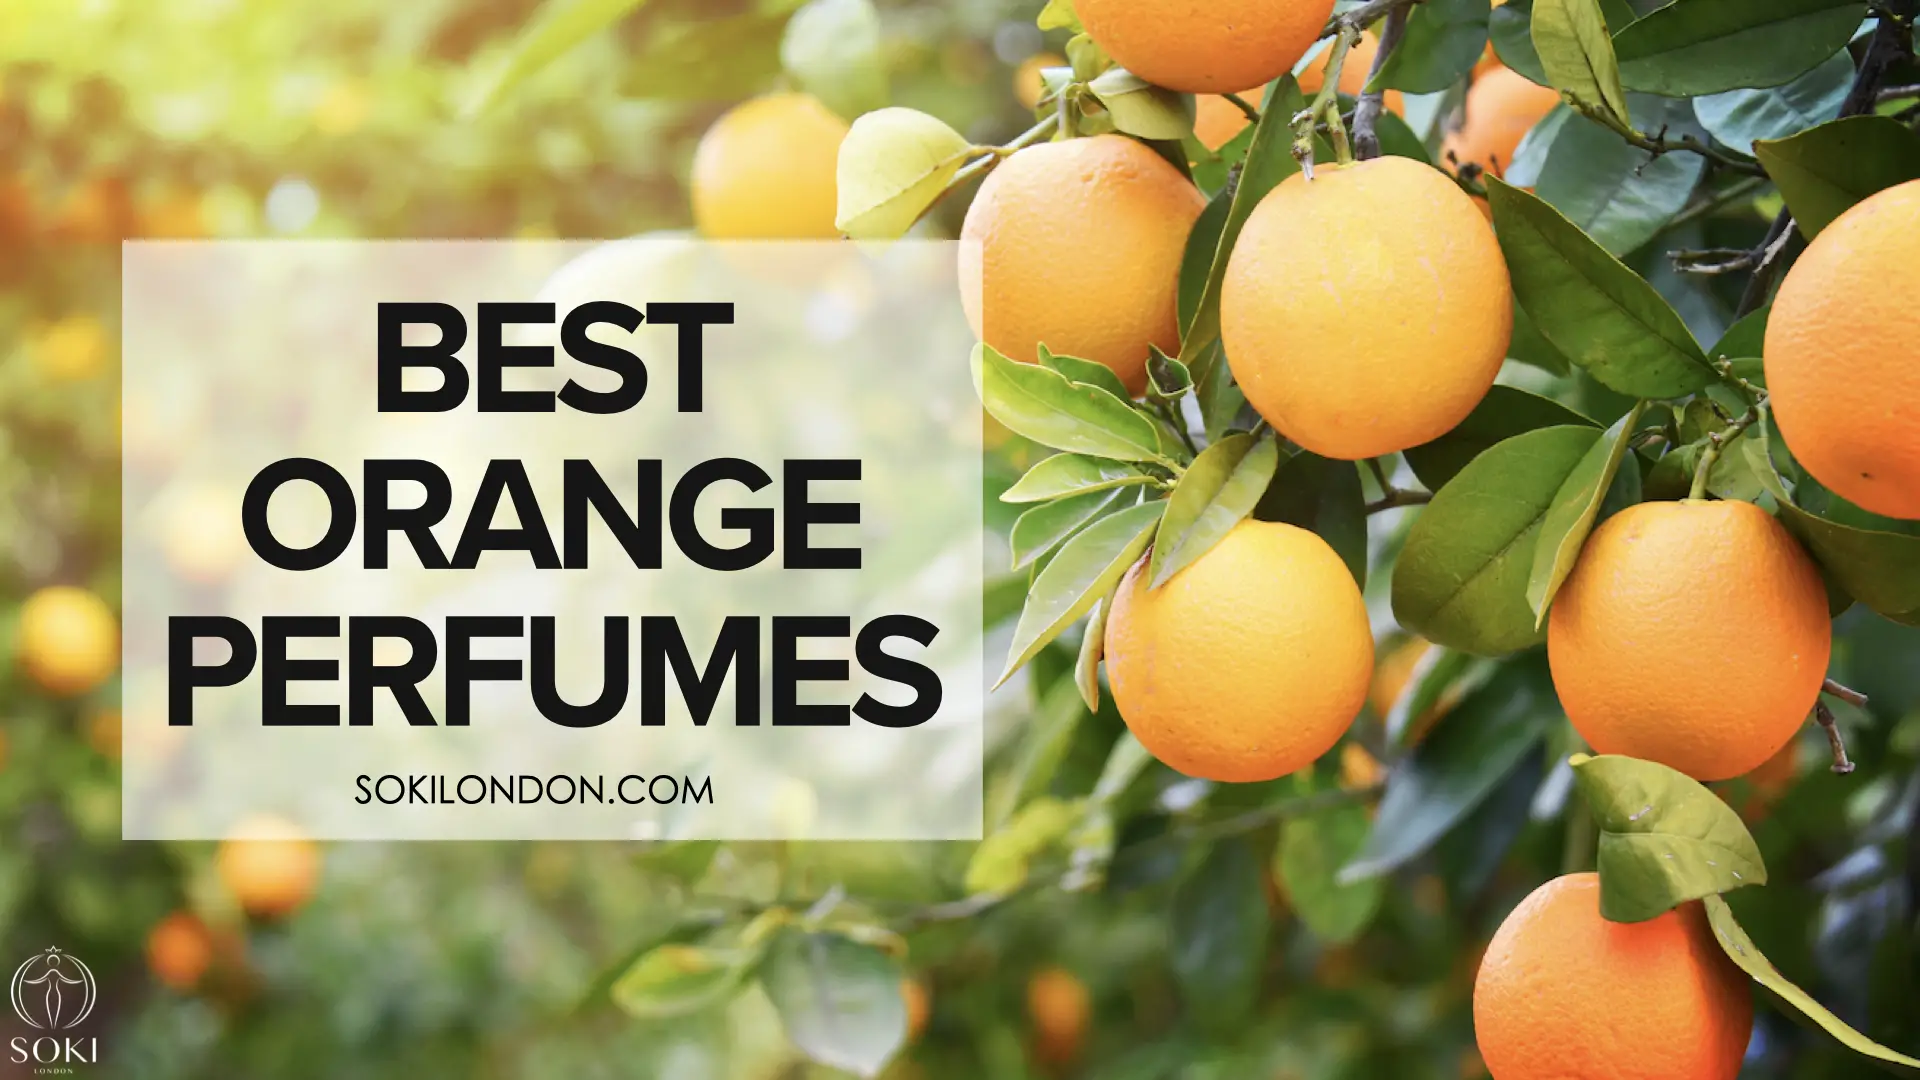 A Guide To The Best Orange Perfumes